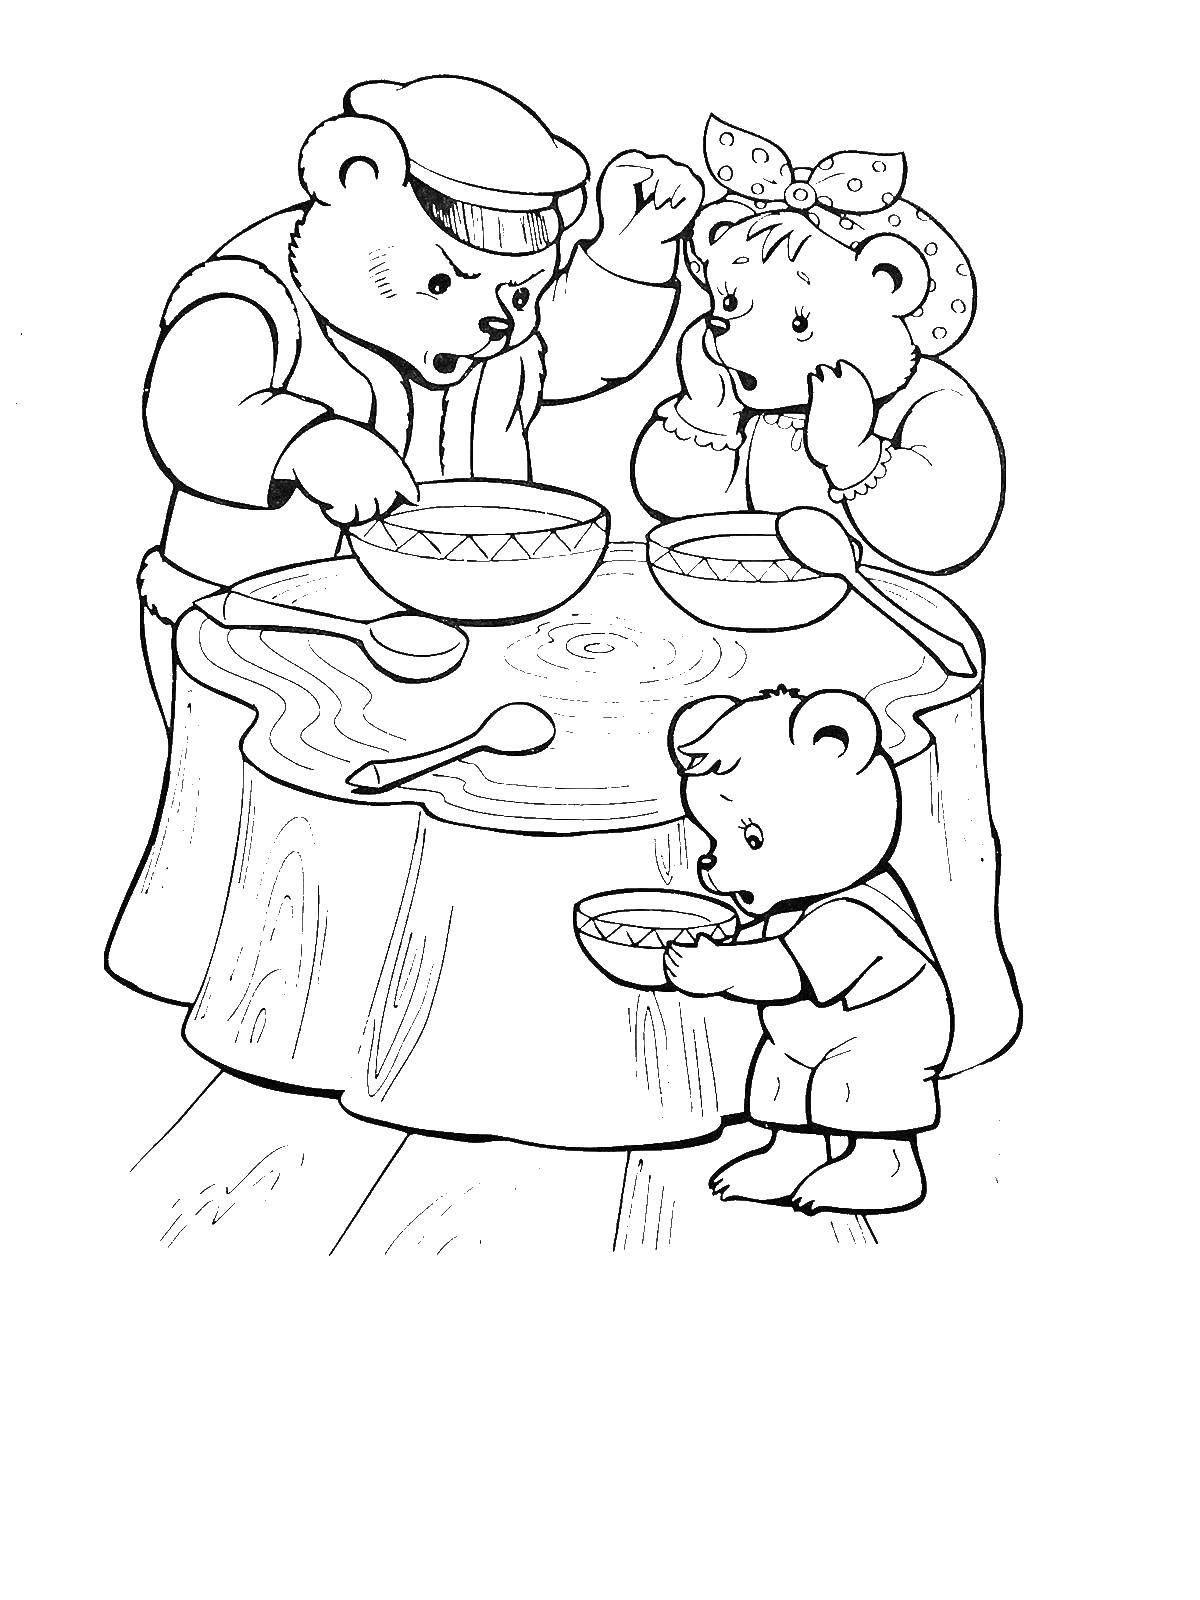 Coloring The three bears. Category Fairy tales. Tags:  Tale, the three bears.